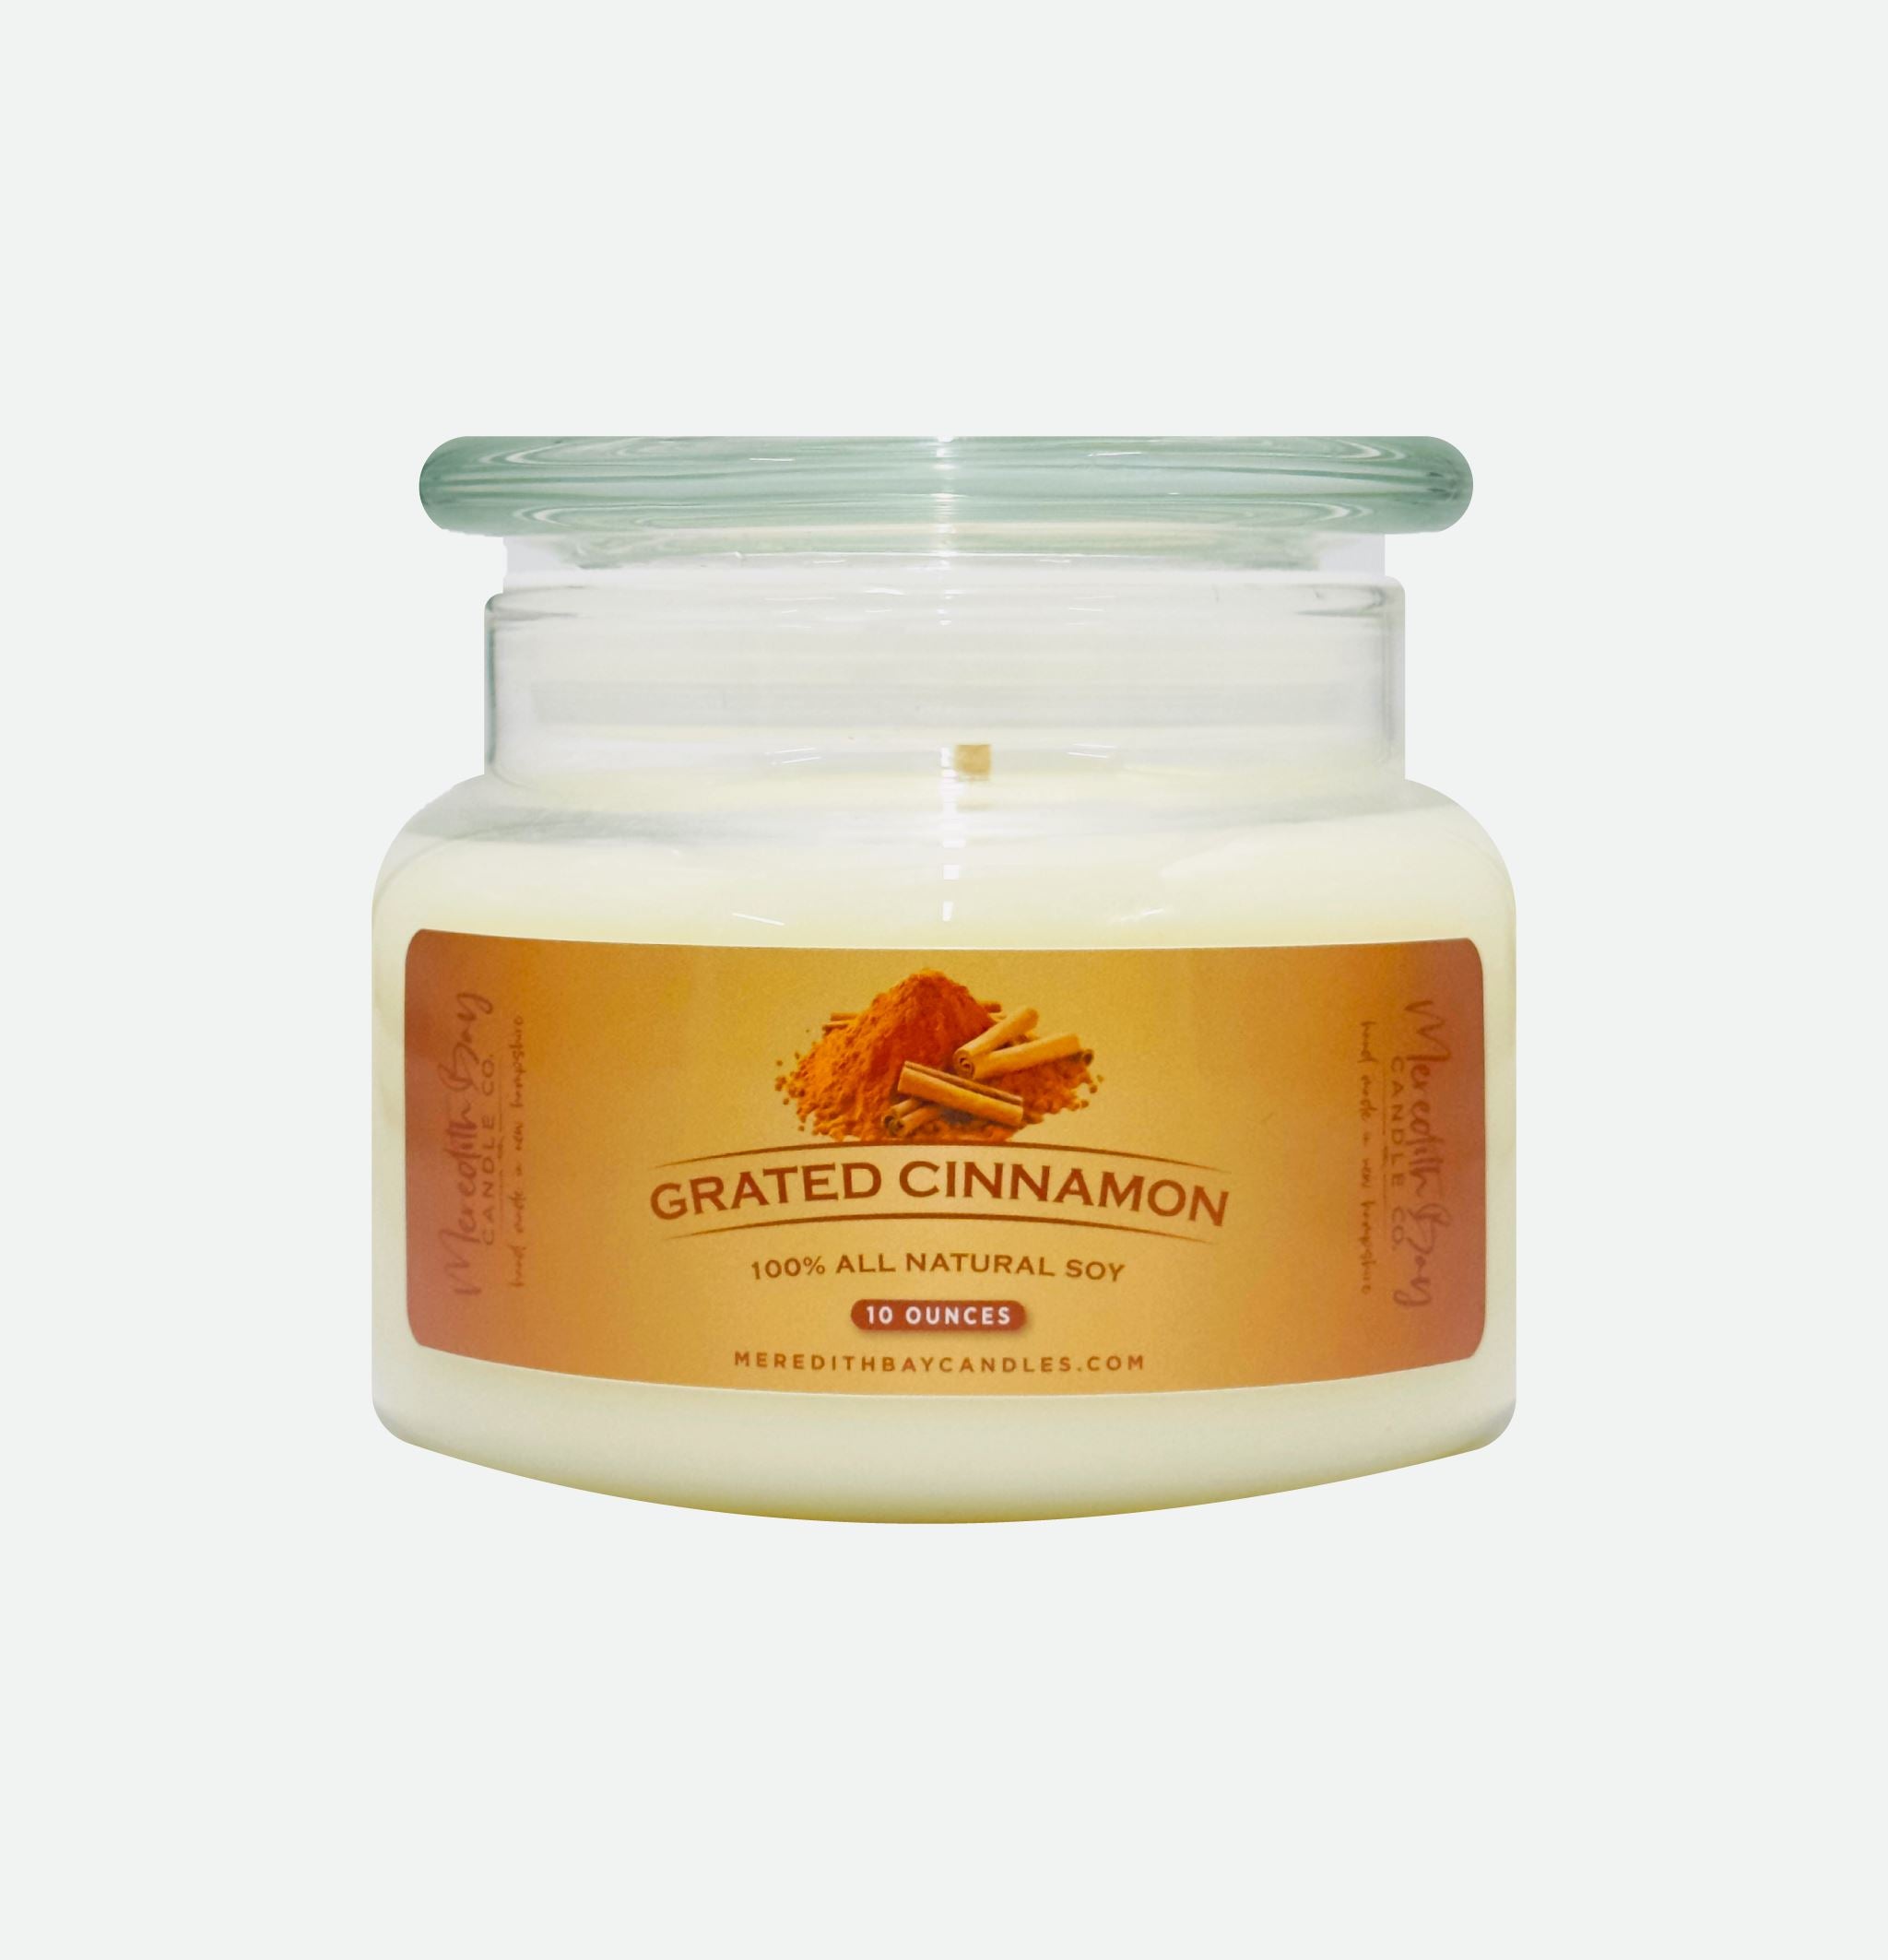 Grated Cinnamon Soy Candle Meredith Bay Candle Co 10 Oz 